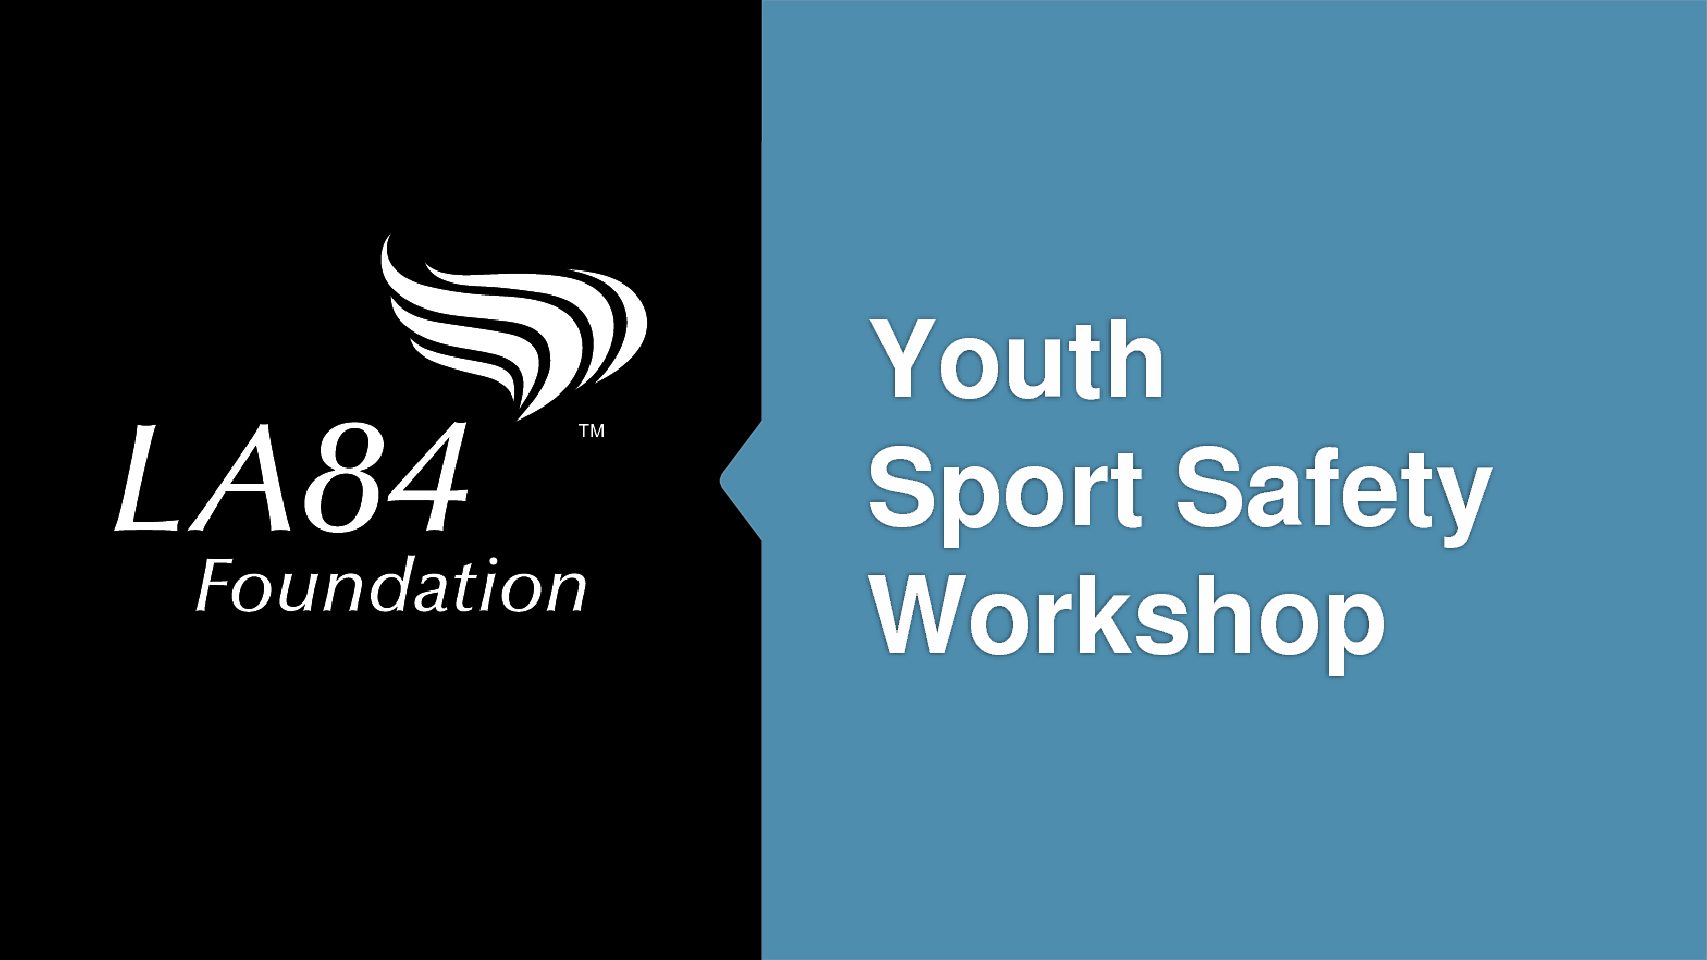 Youth Safety Workshops PPT for Preventing Sexual Abuse